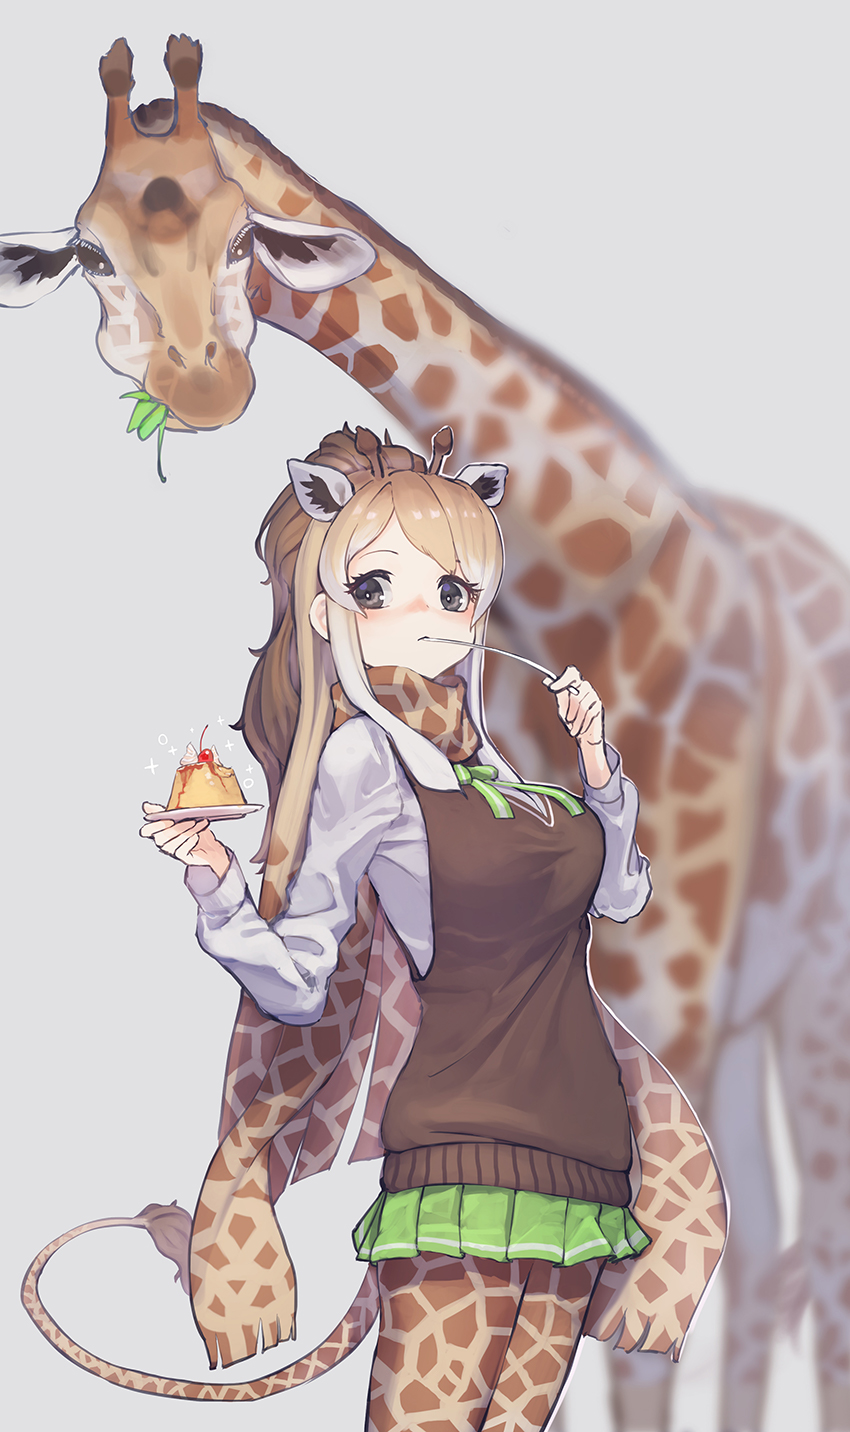 Blue Eyes Anime Girl Red Scarf Giraffe Background HD Anime Girl Wallpapers   HD Wallpapers  ID 104929